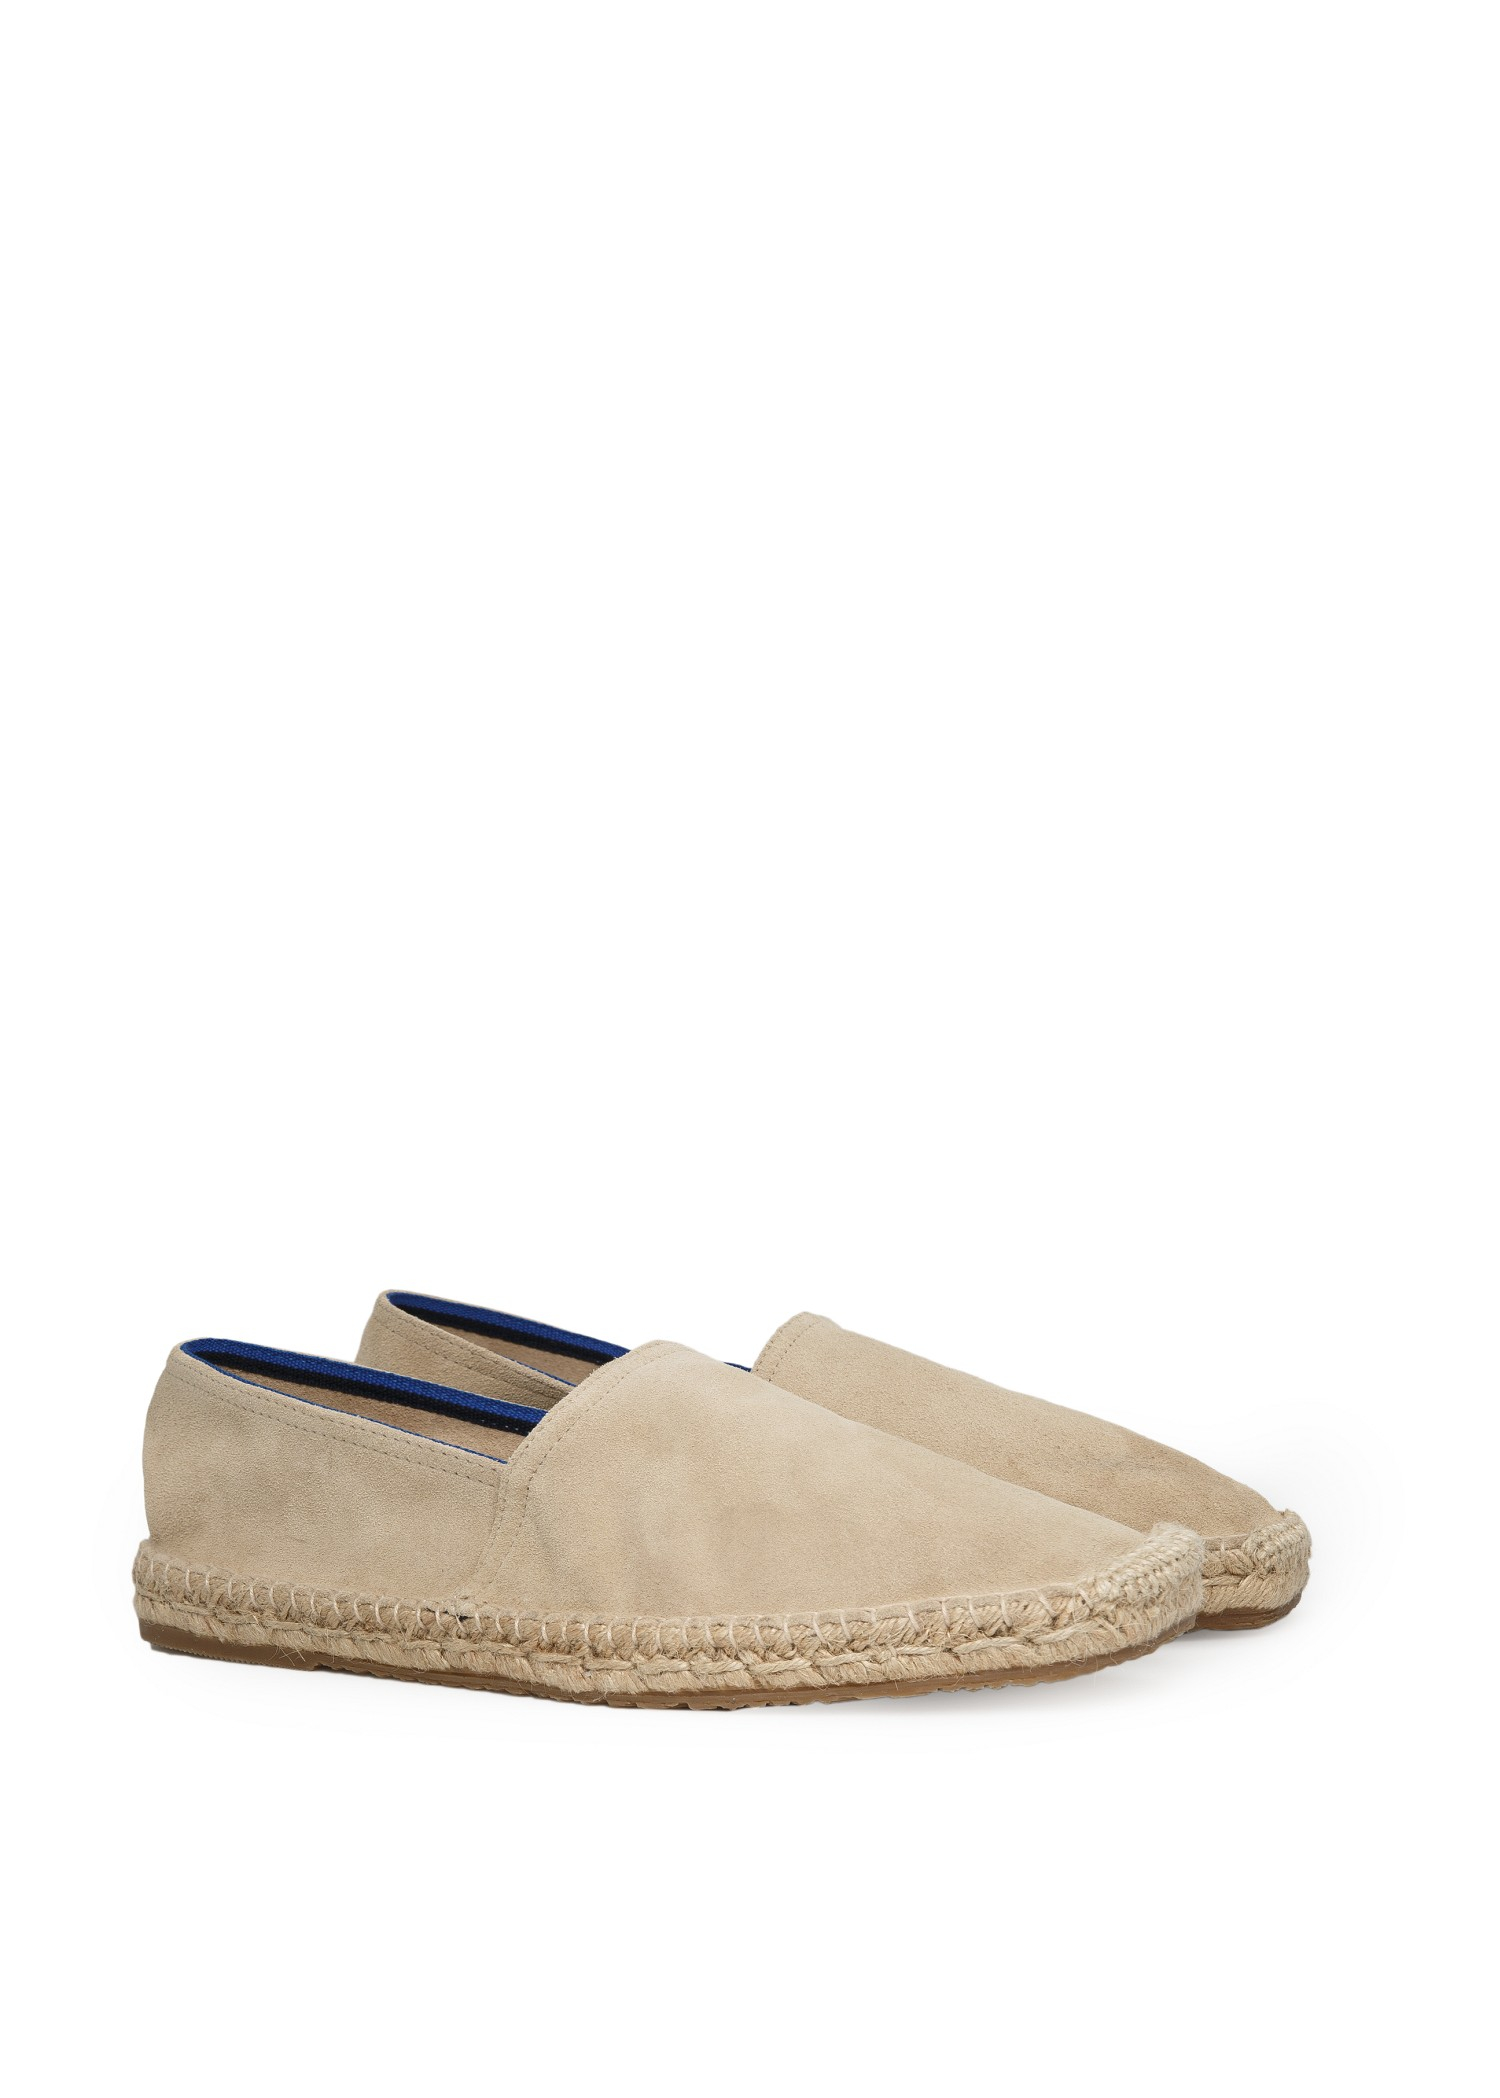 Lyst - Mango Jute Sole Suede Slipon Shoes in Natural for Men